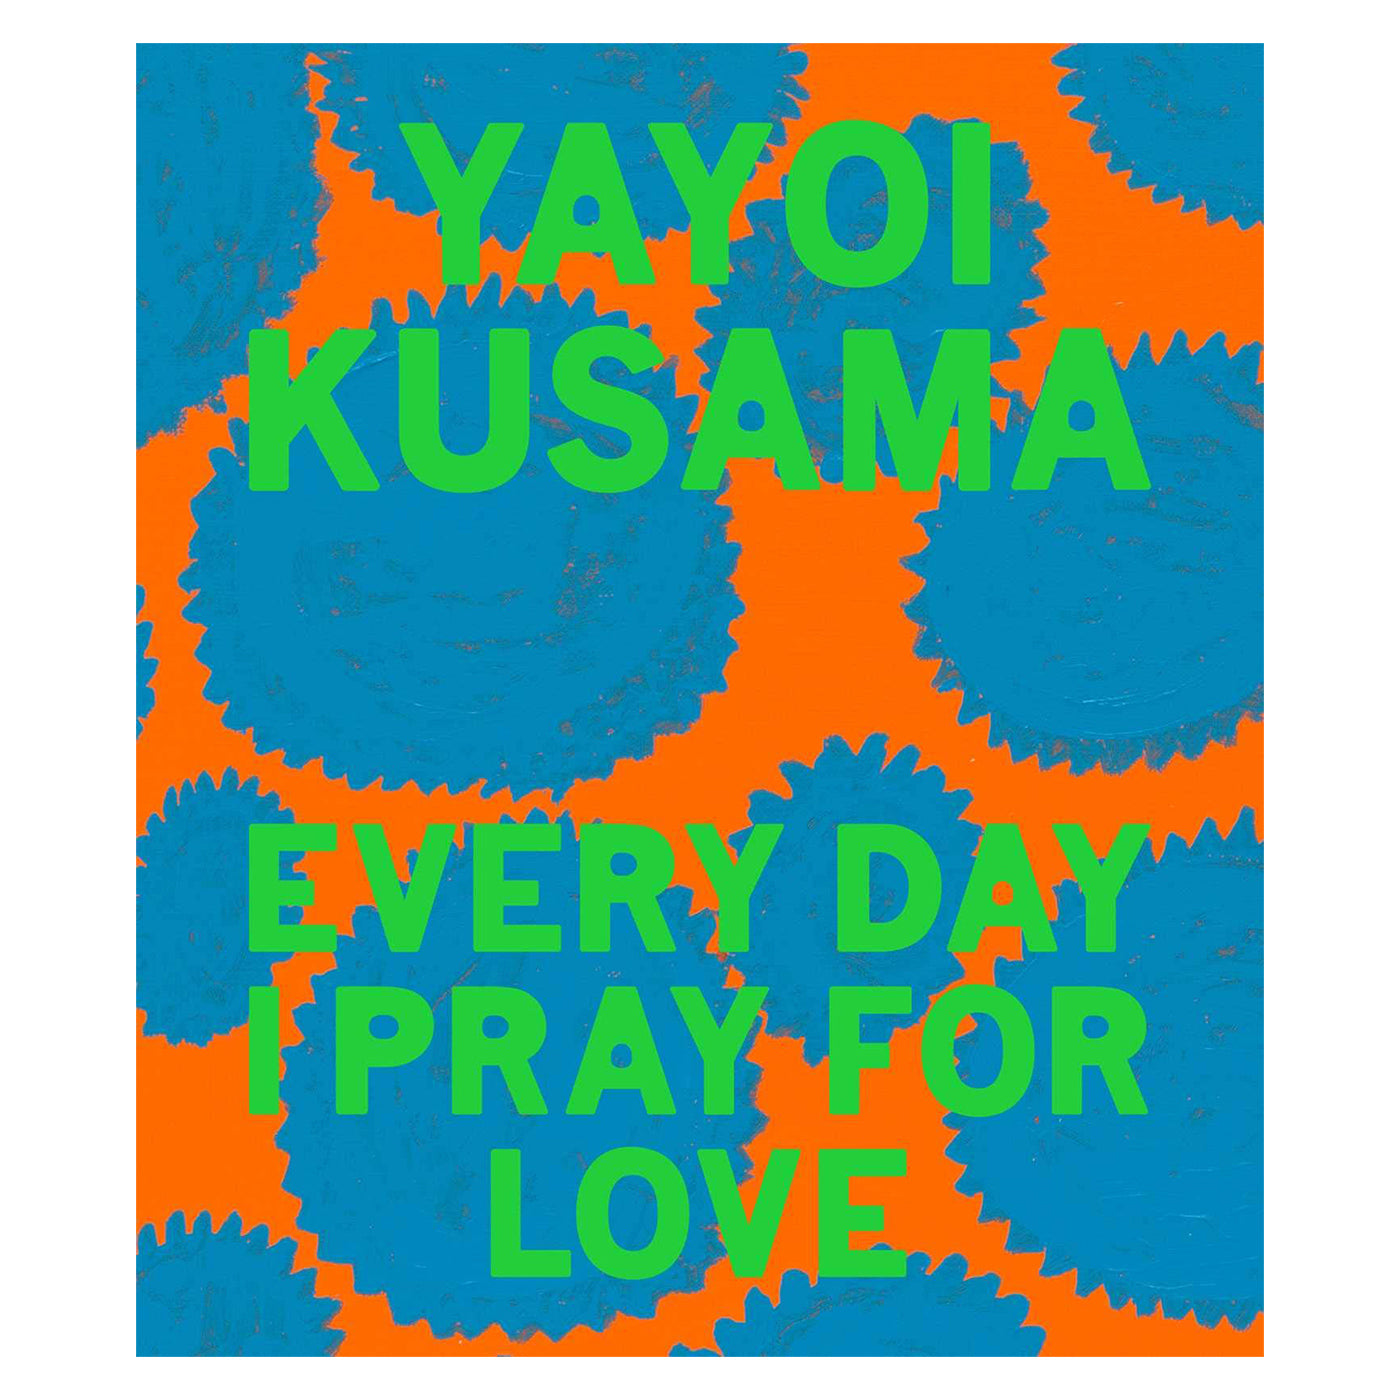 Yayoi Kusama: Every Day I Pray For Love's front cover.